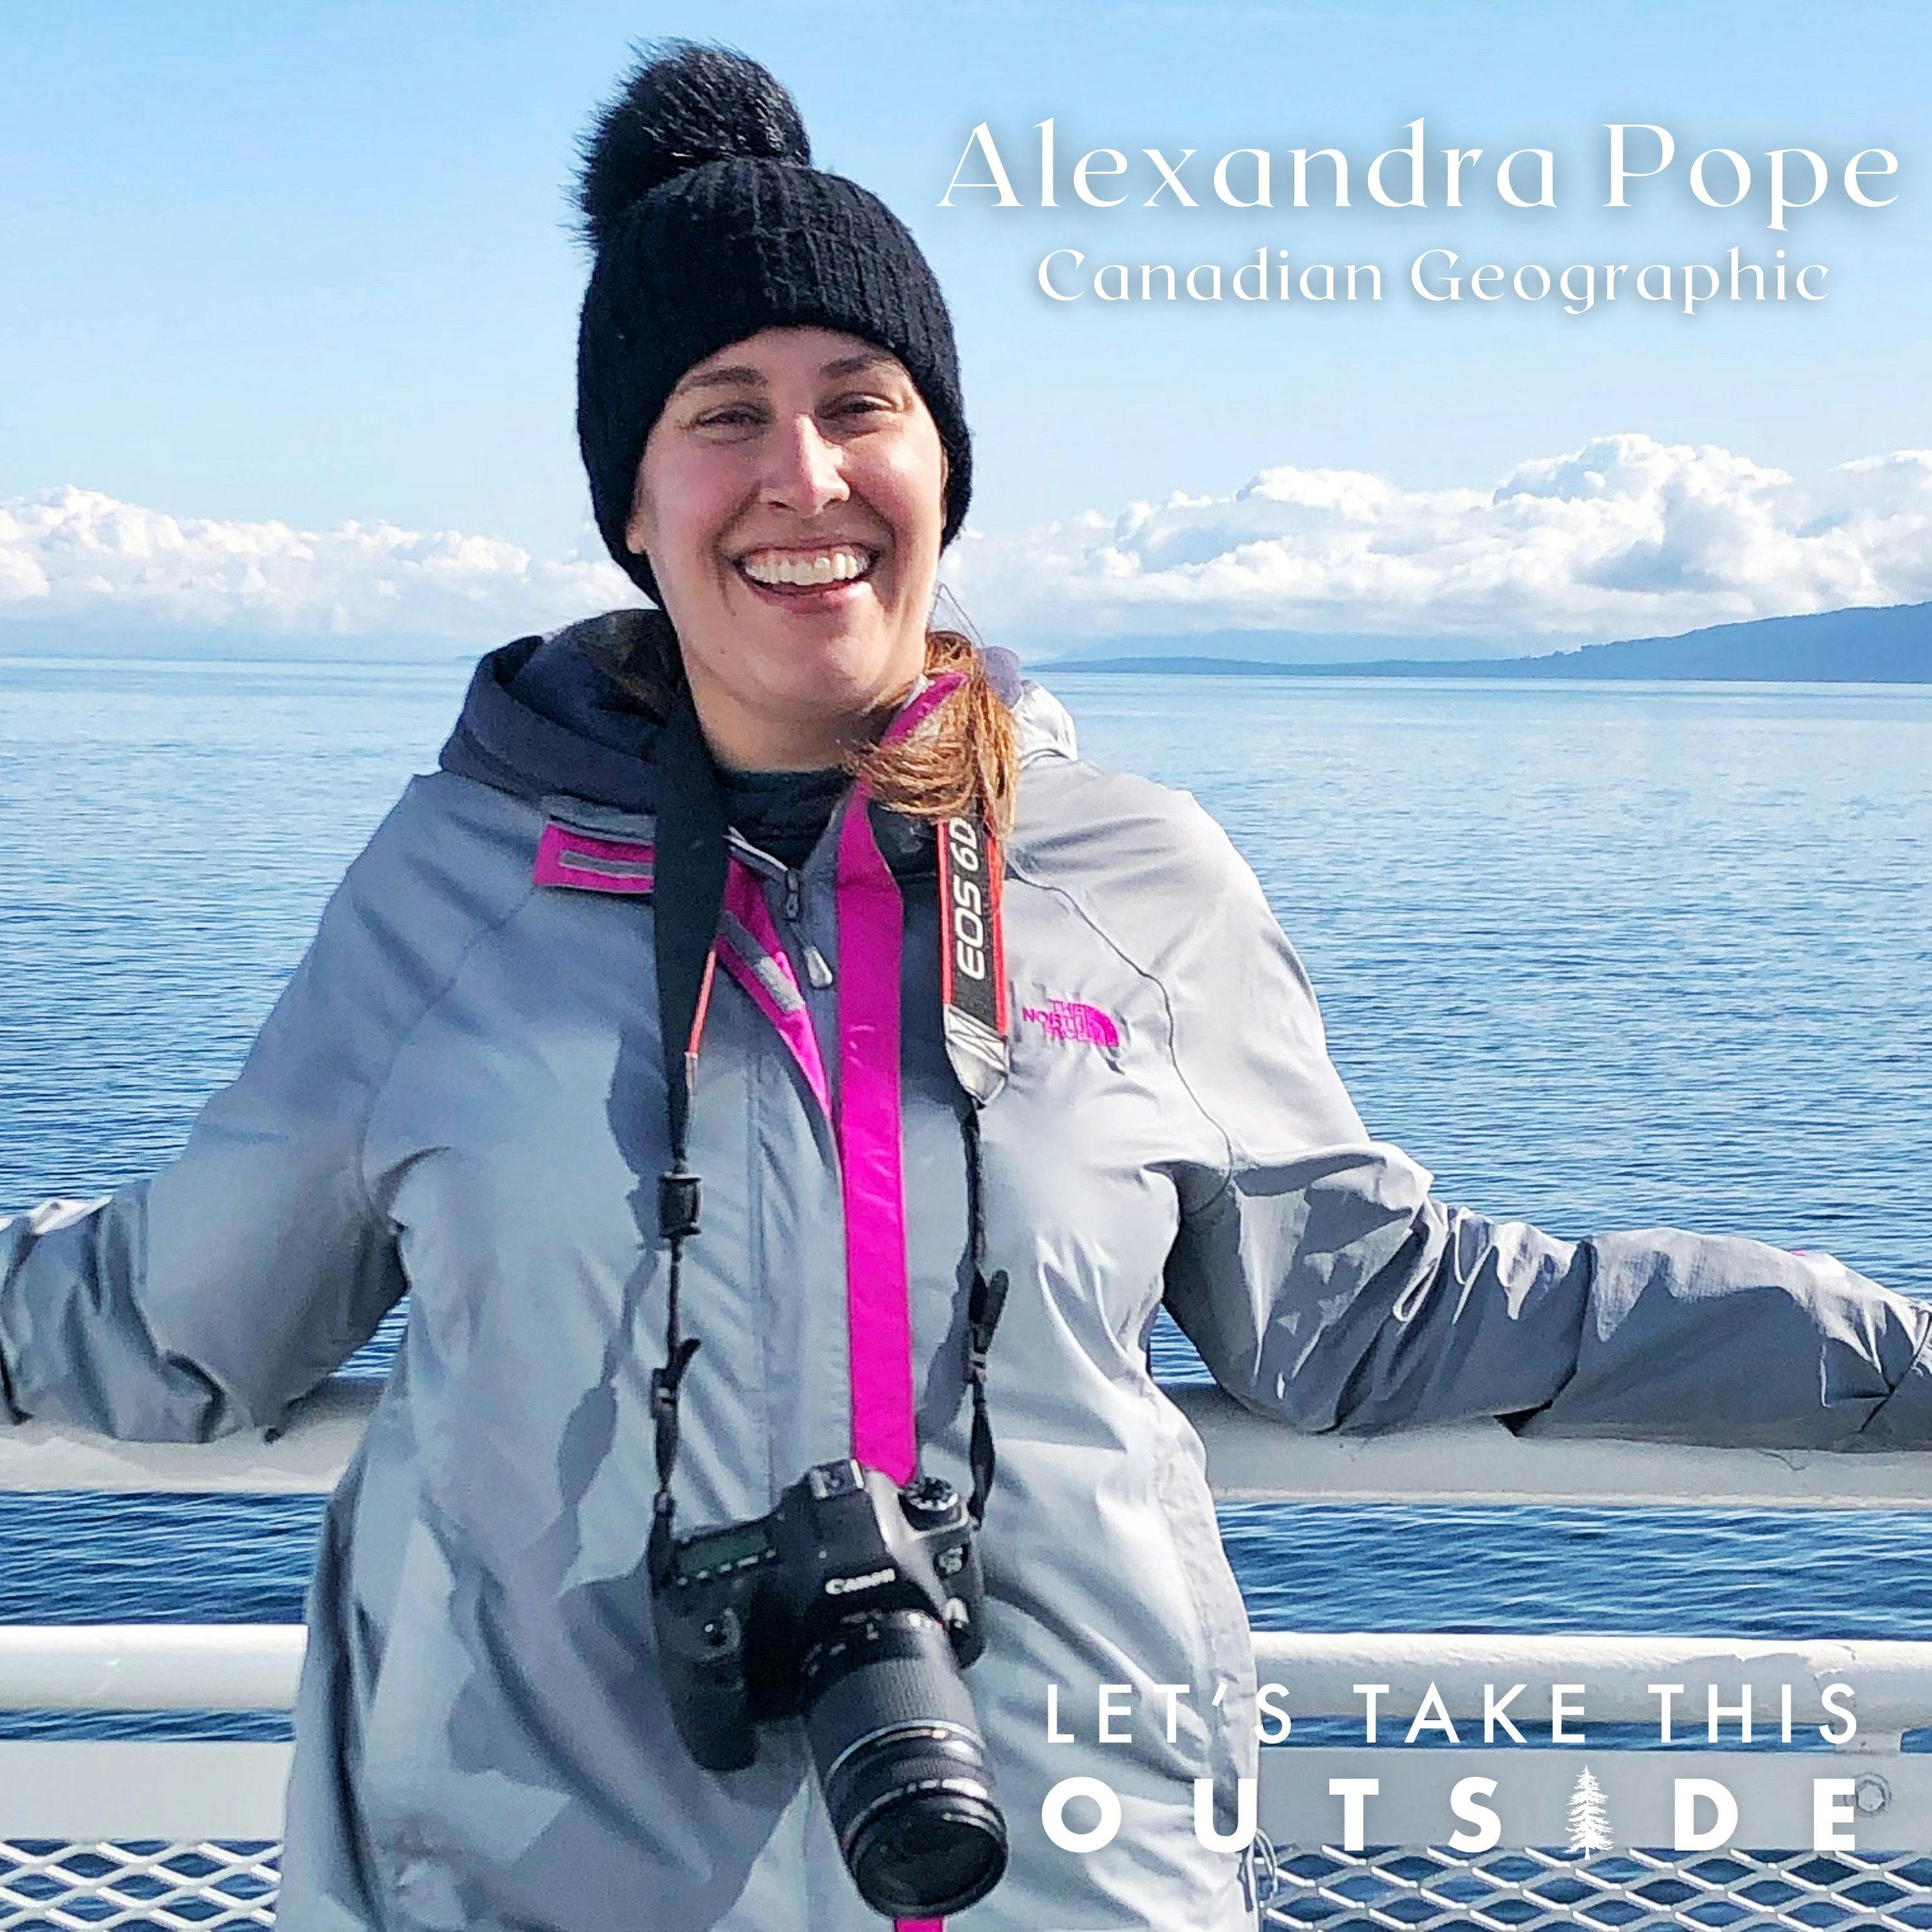 Alexandra Pope - Editor-In-Chief of Canadian Geographic